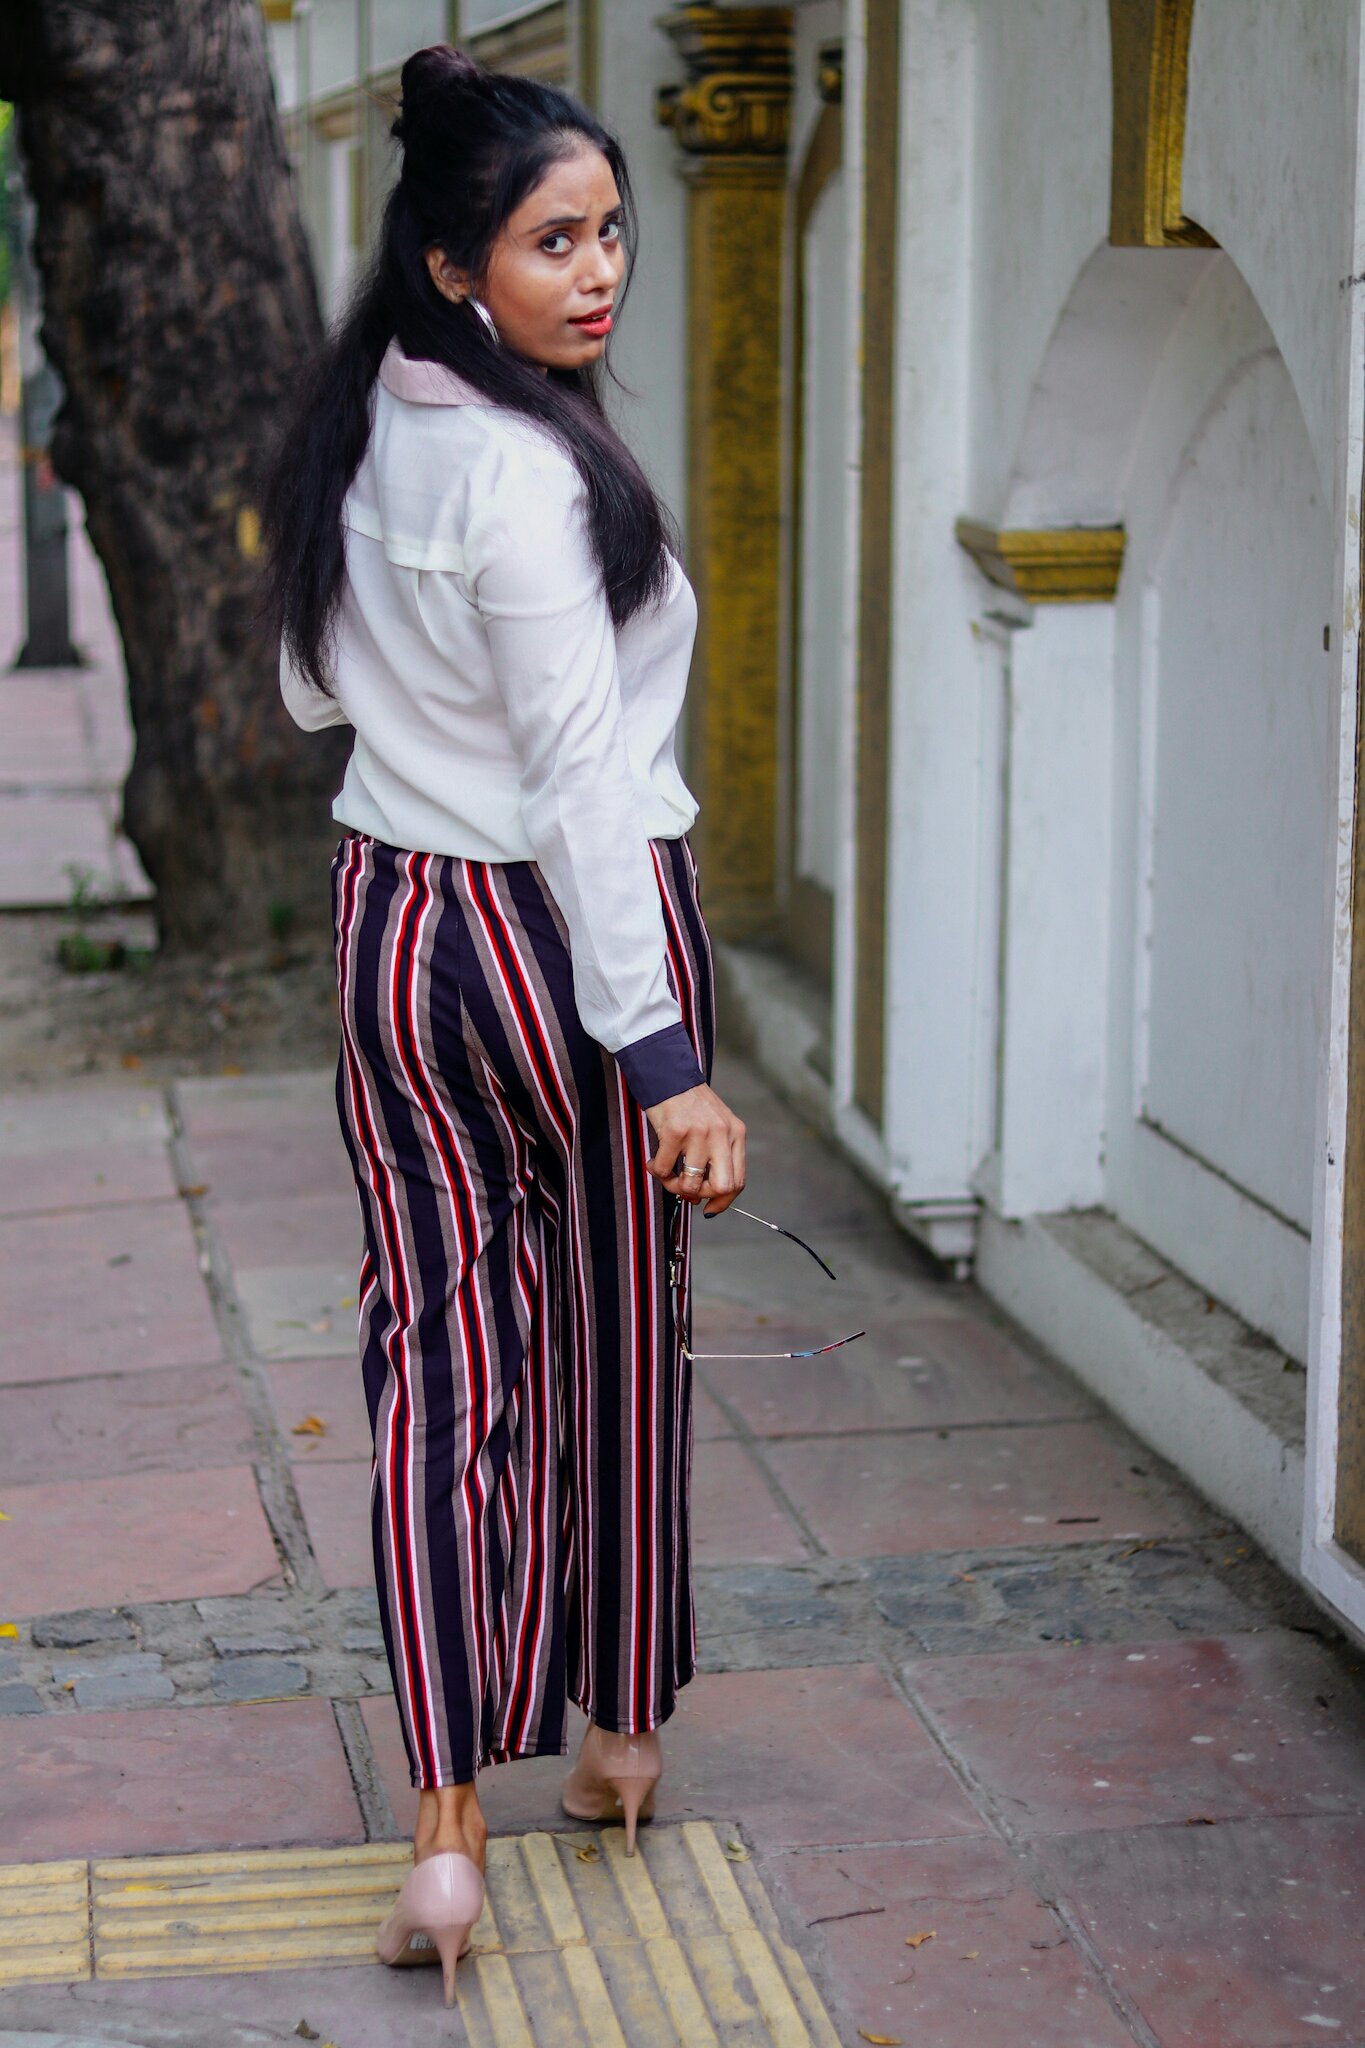 How to Wear Striped Pants - Outfitmag.com